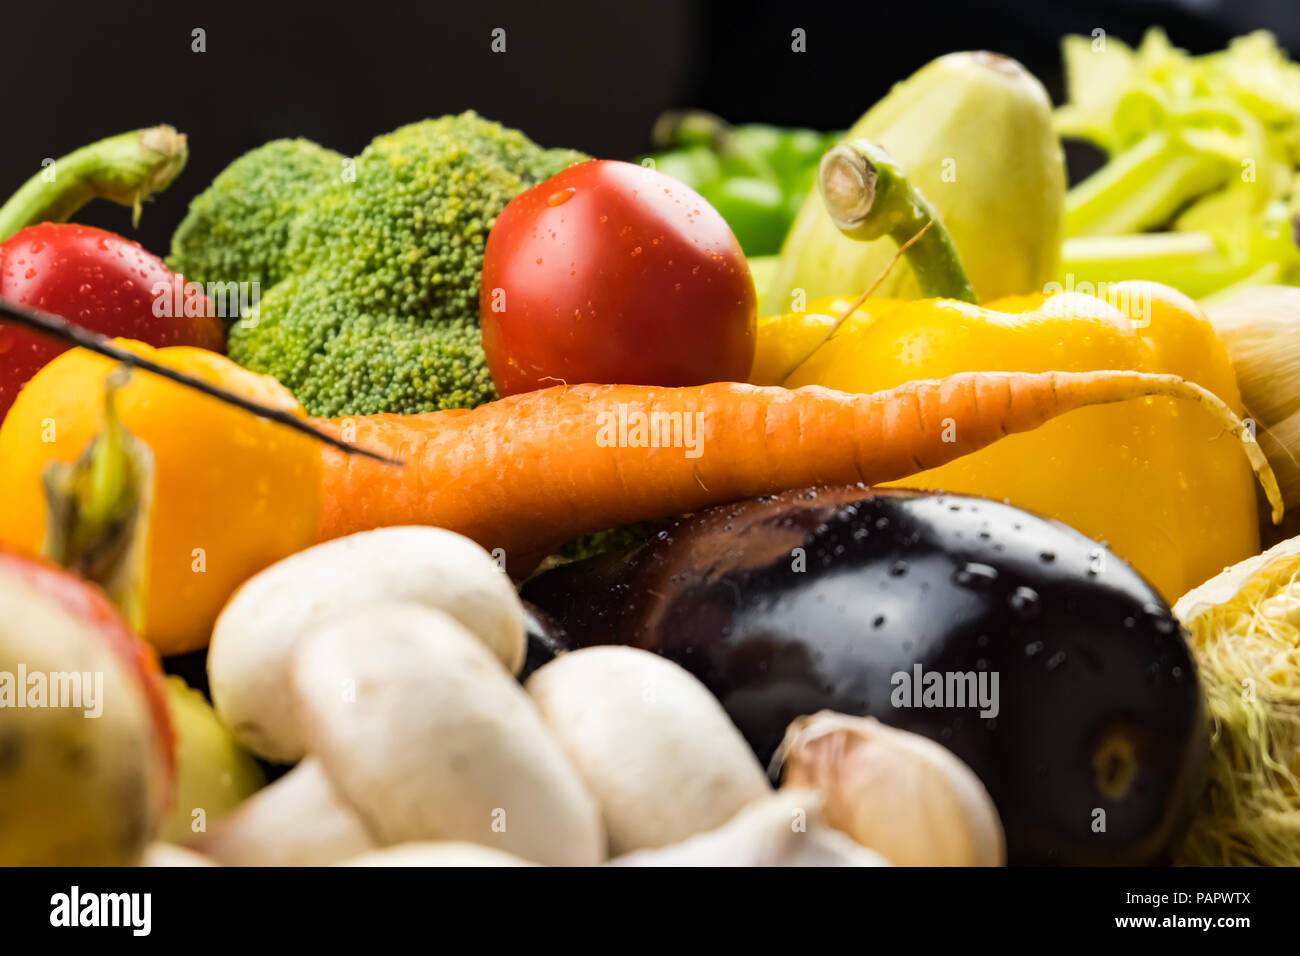 Locally grown bell pepper, corn, carrot, mushrooms and other natural vegan food laying on table. Close-up image of fresh organic vegetables Stock Photo